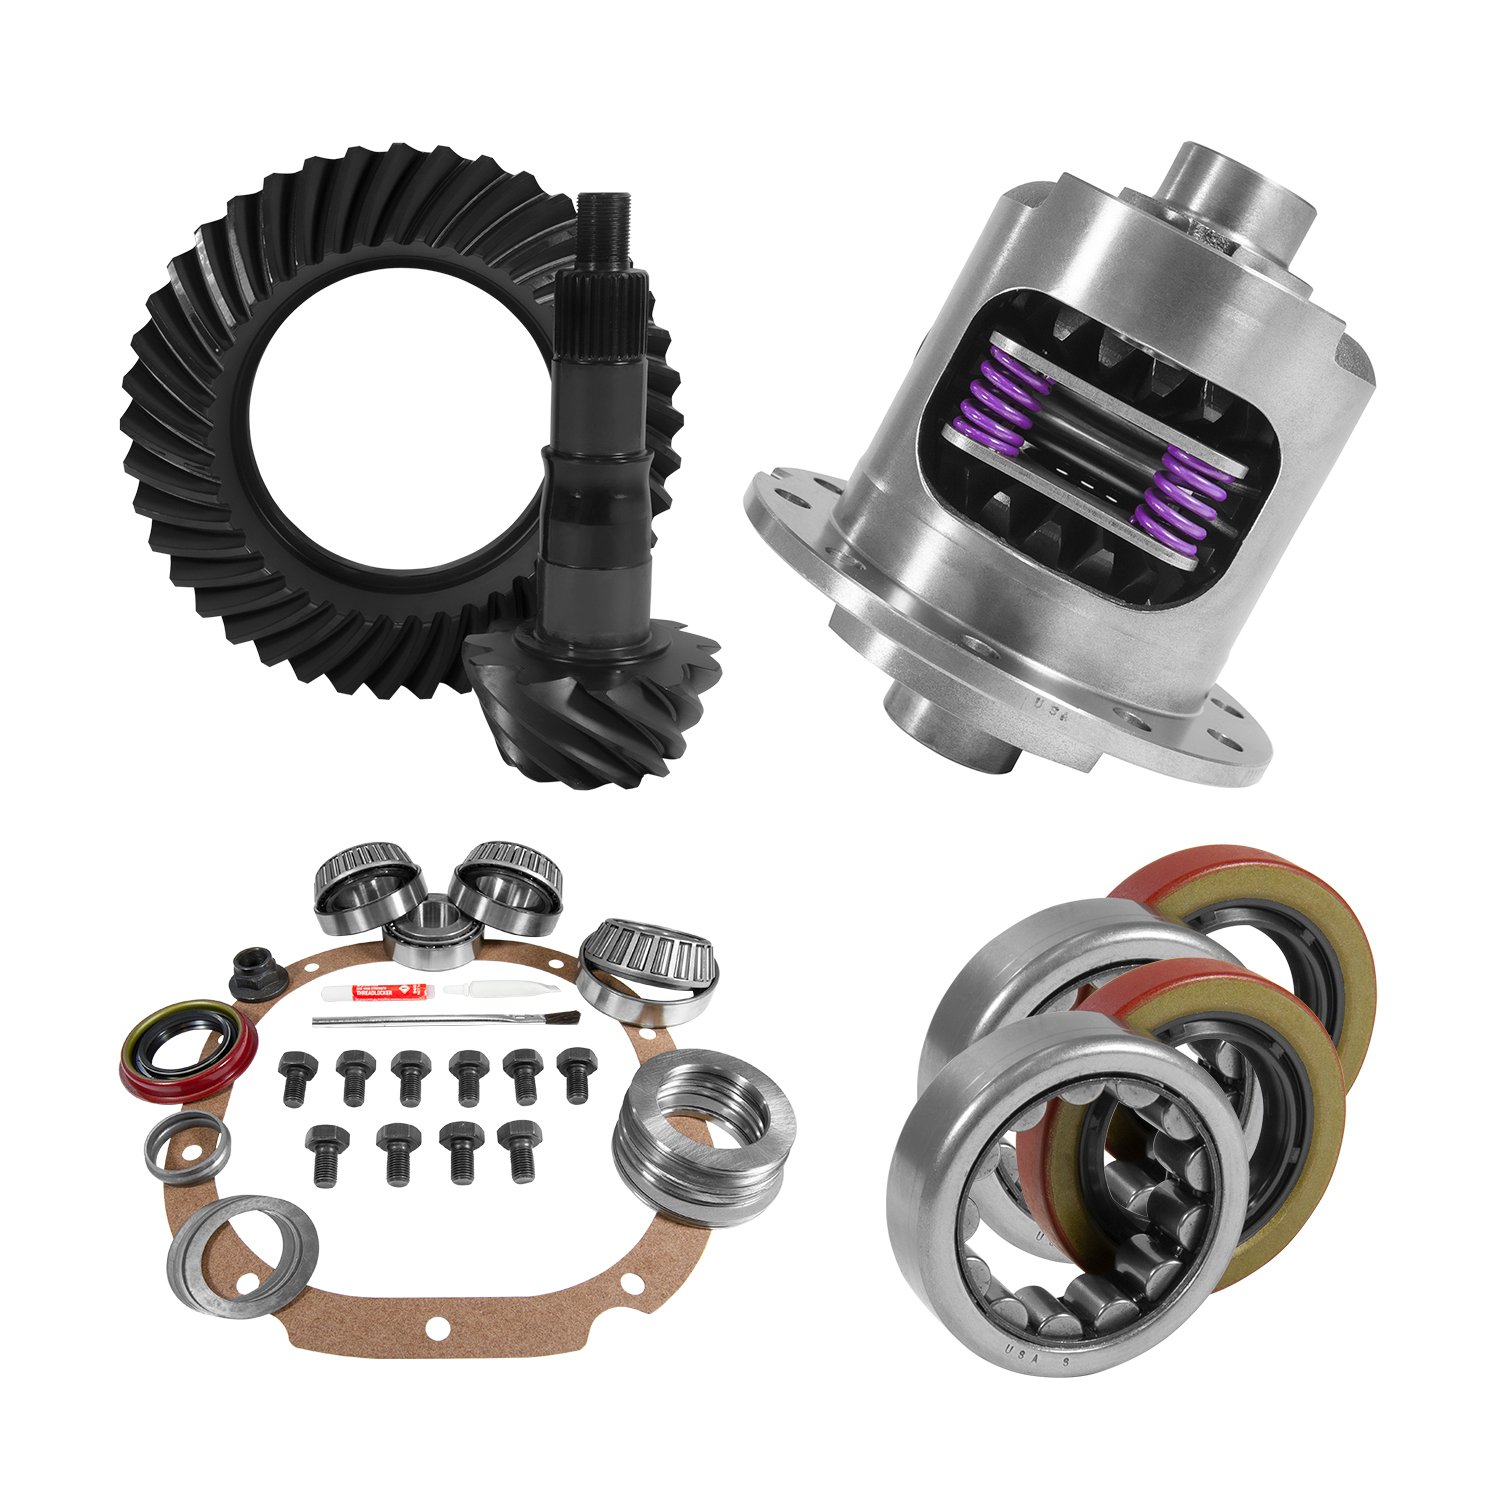 USA Standard 10677 8.8 in. Ford 3.55 Rear Ring & Pinion Install Kit, 28Spl Posi, 2.25 in. Axle Bearings